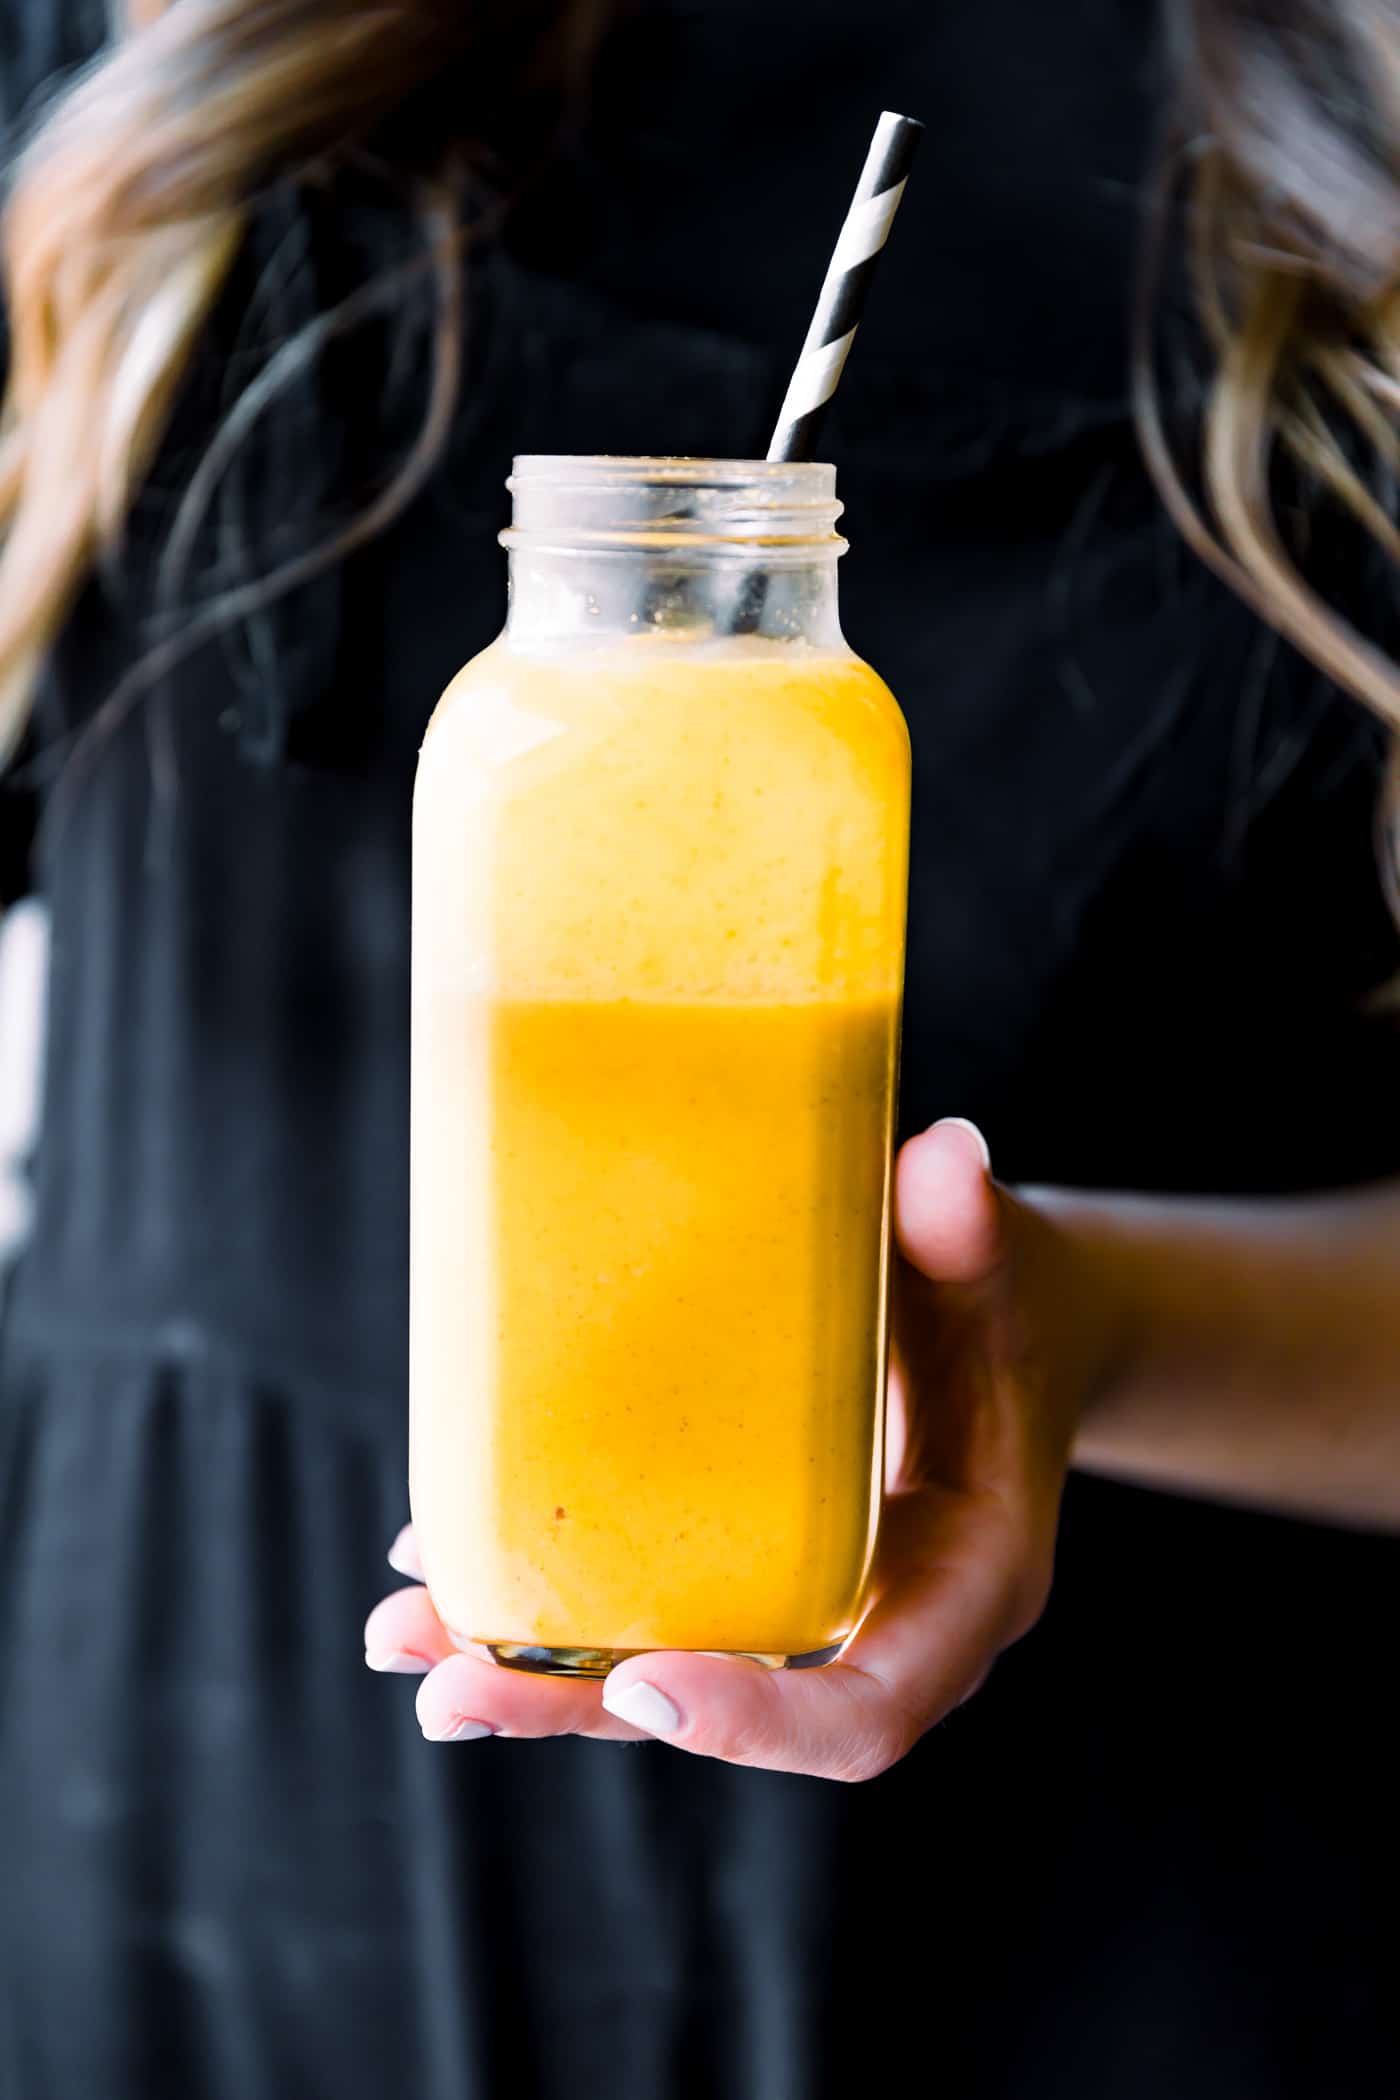 These Orange Probiotic Immunity Boosting Smoothies are perfect for breakfast on the go. A vegetable and fruit based yogurt smoothie rich in vitamin C, Vitamin A, fiber, and Calcium. No sugars added.